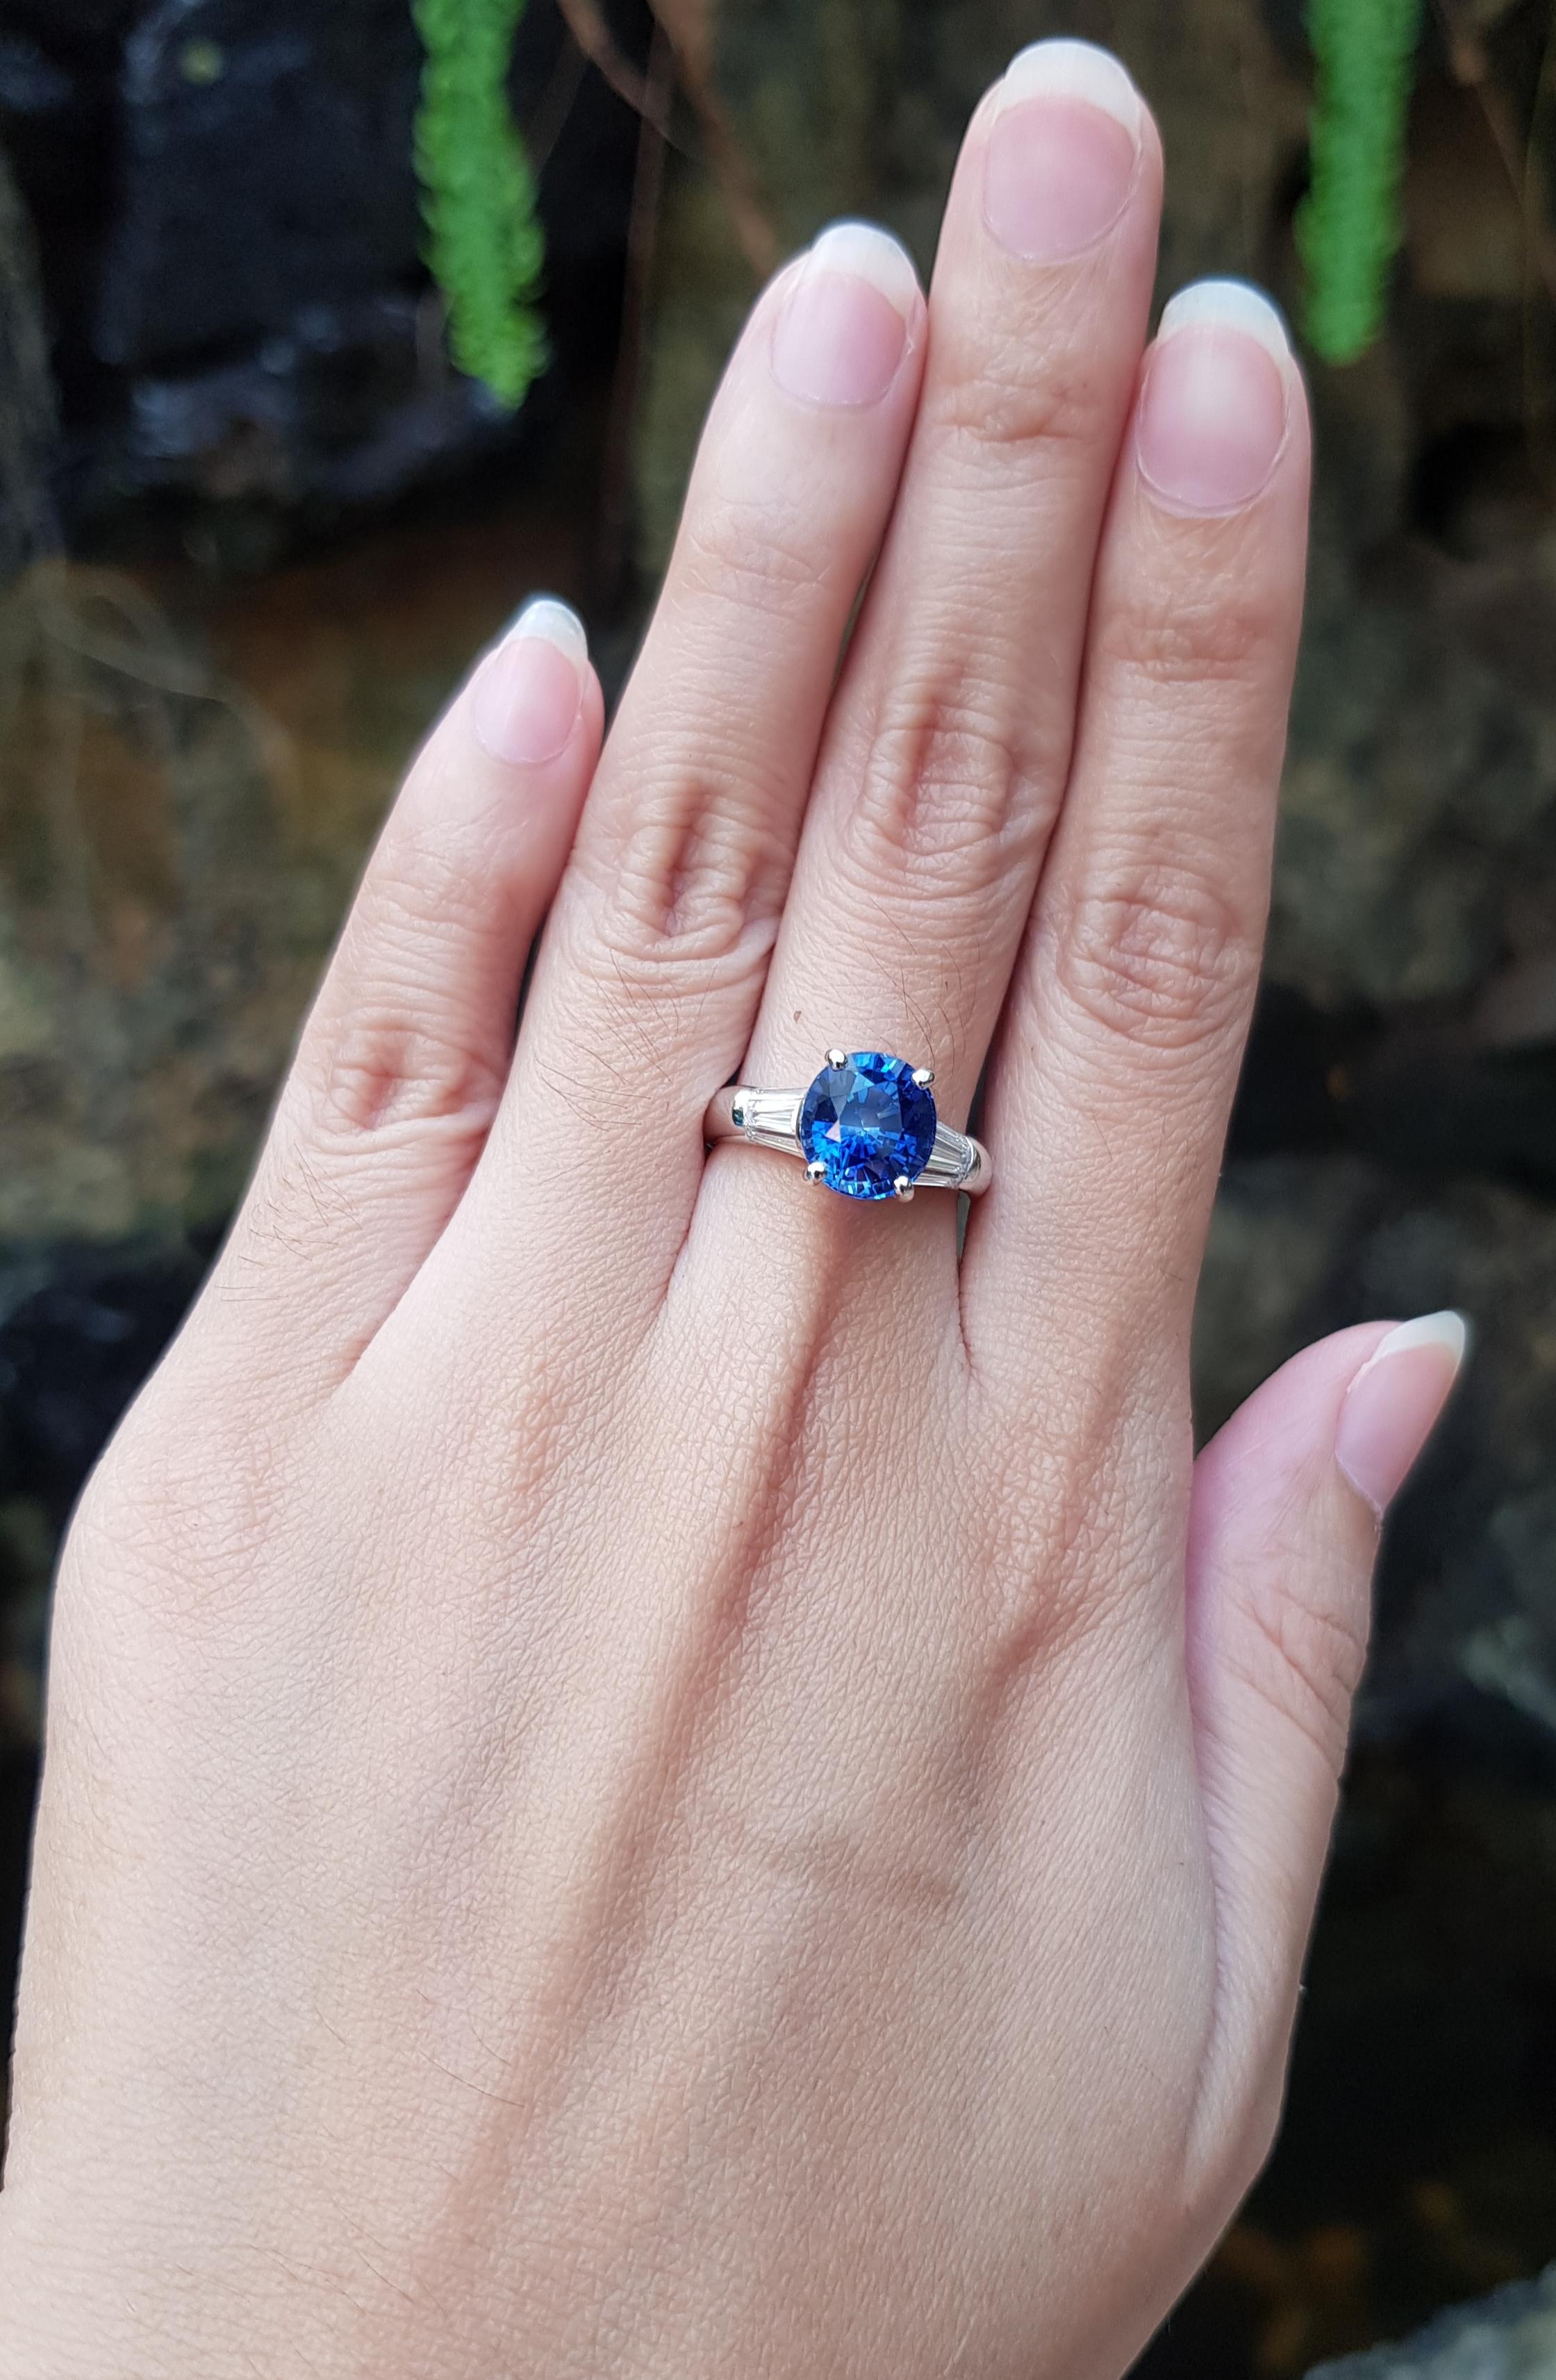 Blue Sapphire 3.85 carats with Diamond 0.74 carat Ring set in 18 Karat White Gold Settings
(GIA Certified)

Width:  0.8 cm 
Length: 0.9 cm
Ring Size: 53
Total Weight: 8.48 grams

